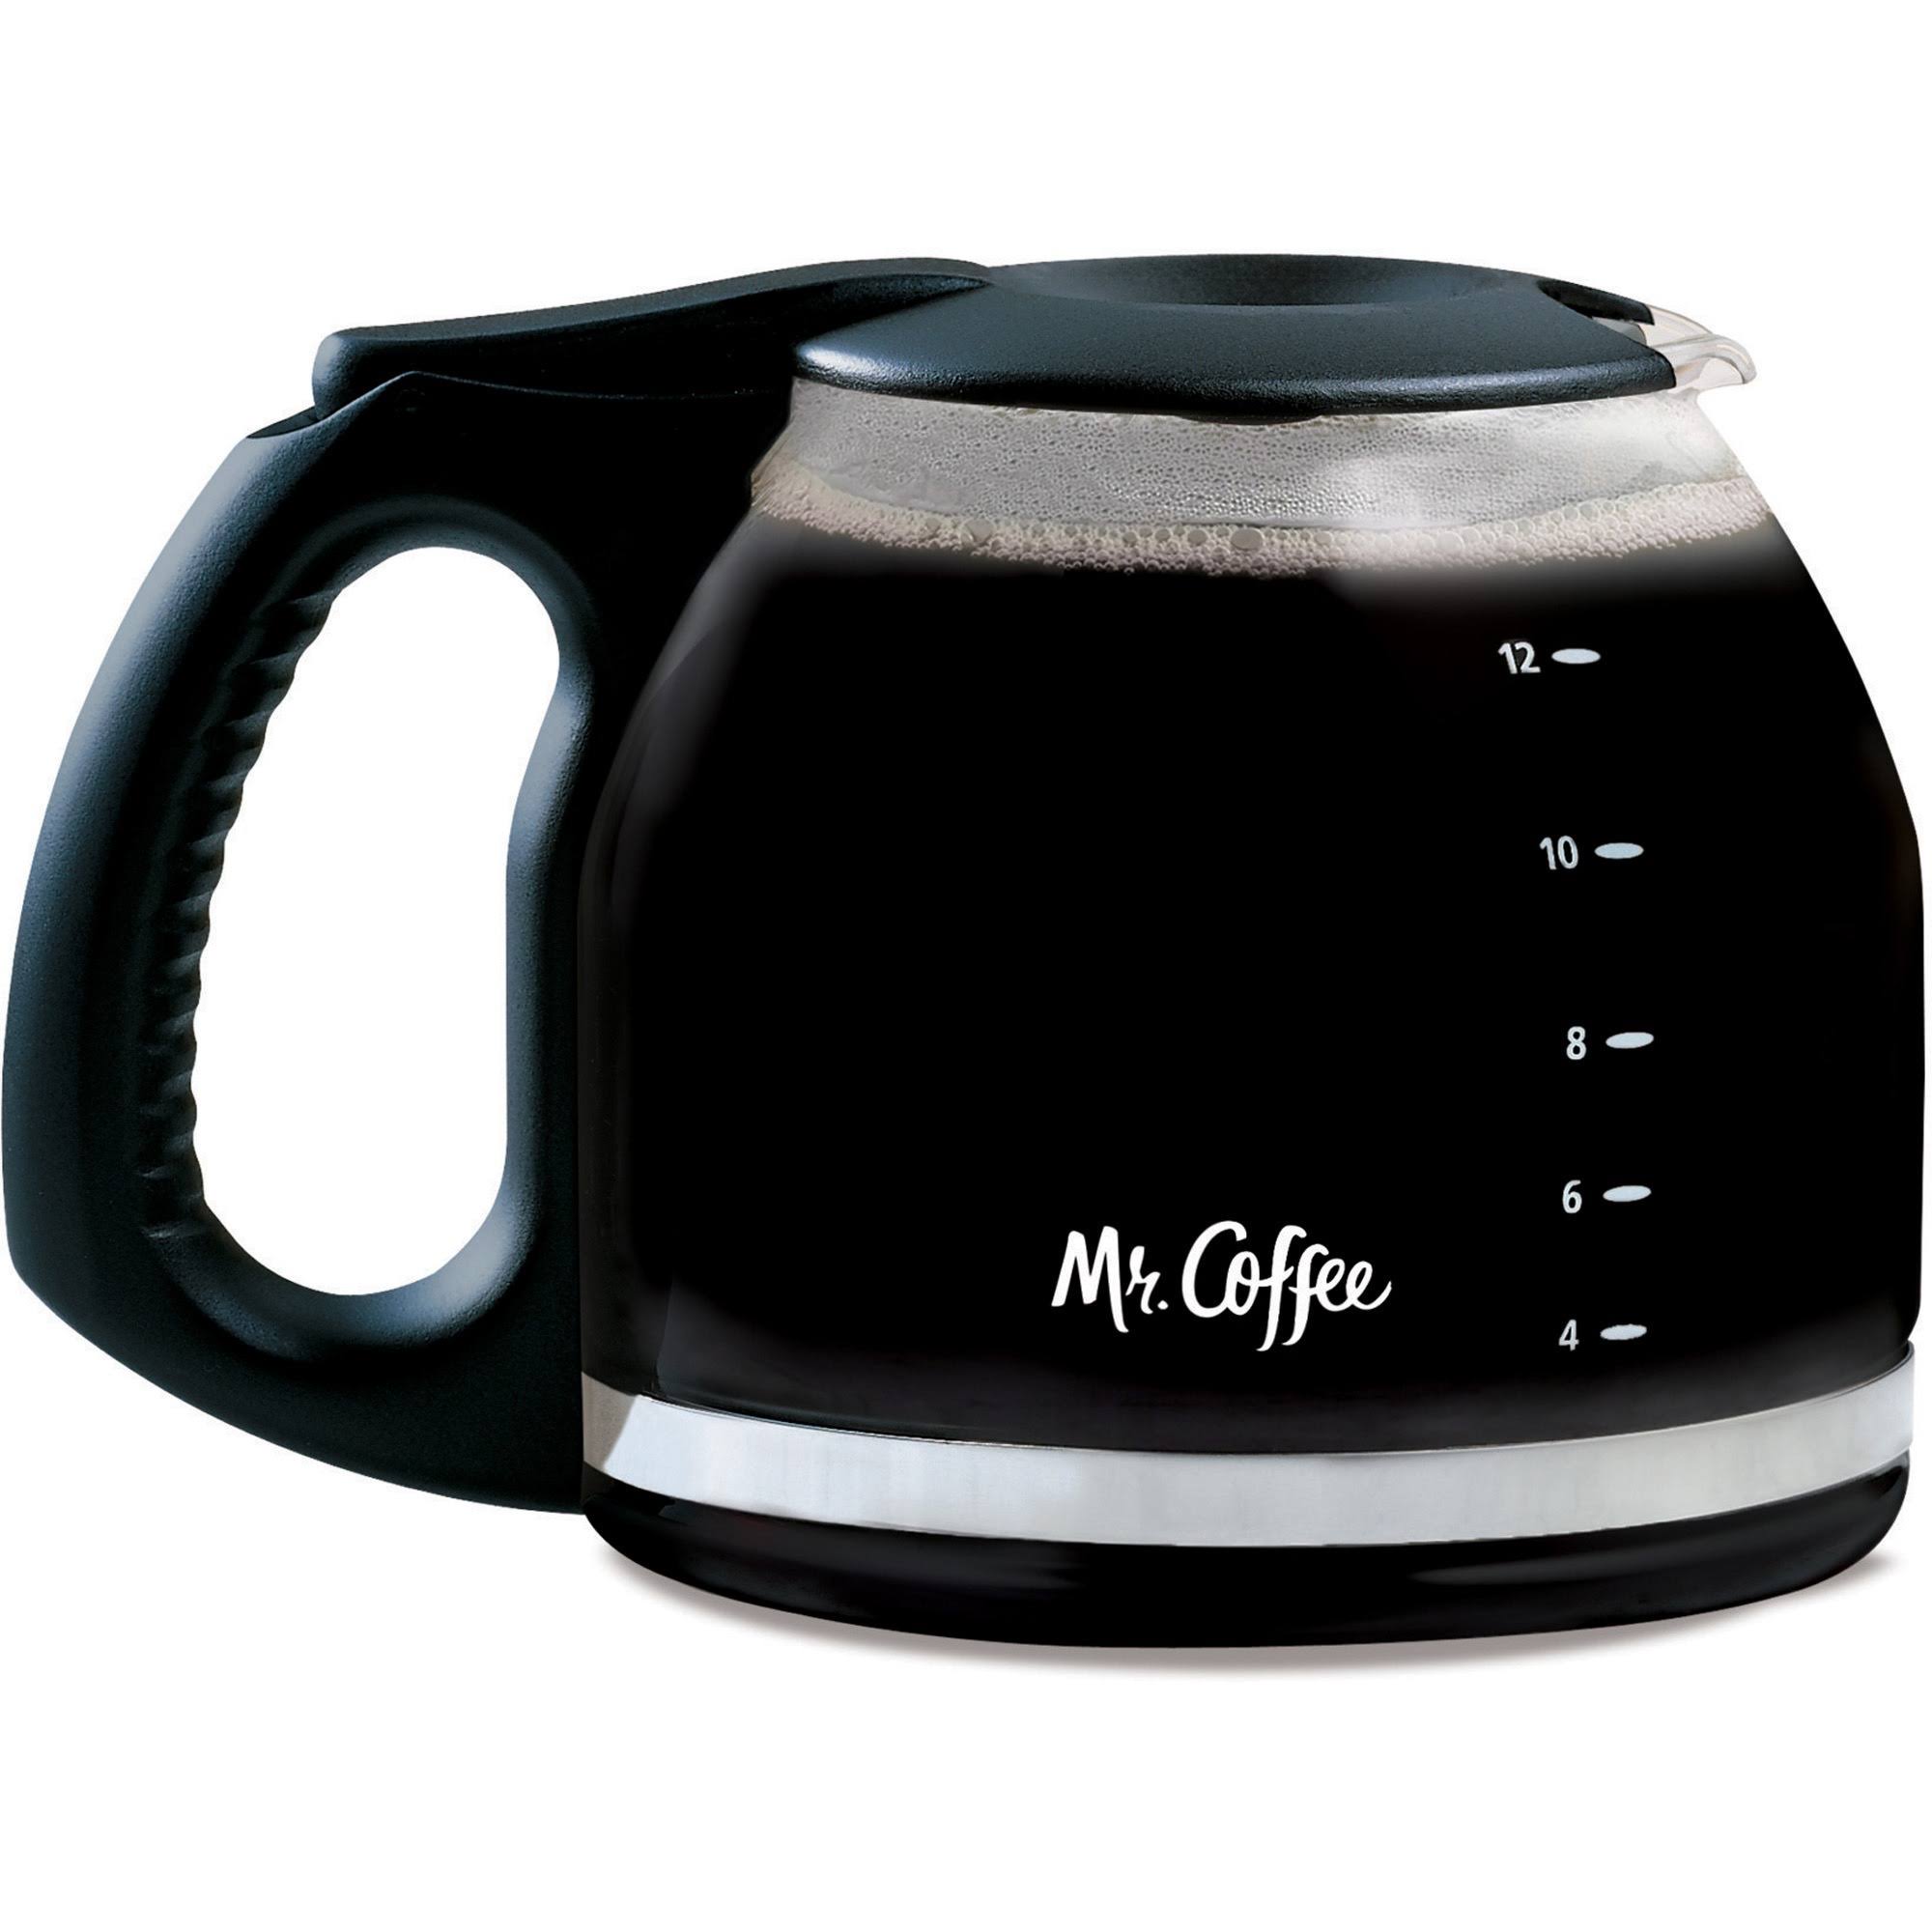 Mr. Coffee Replacement 12-Cup Glass Carafe, Black